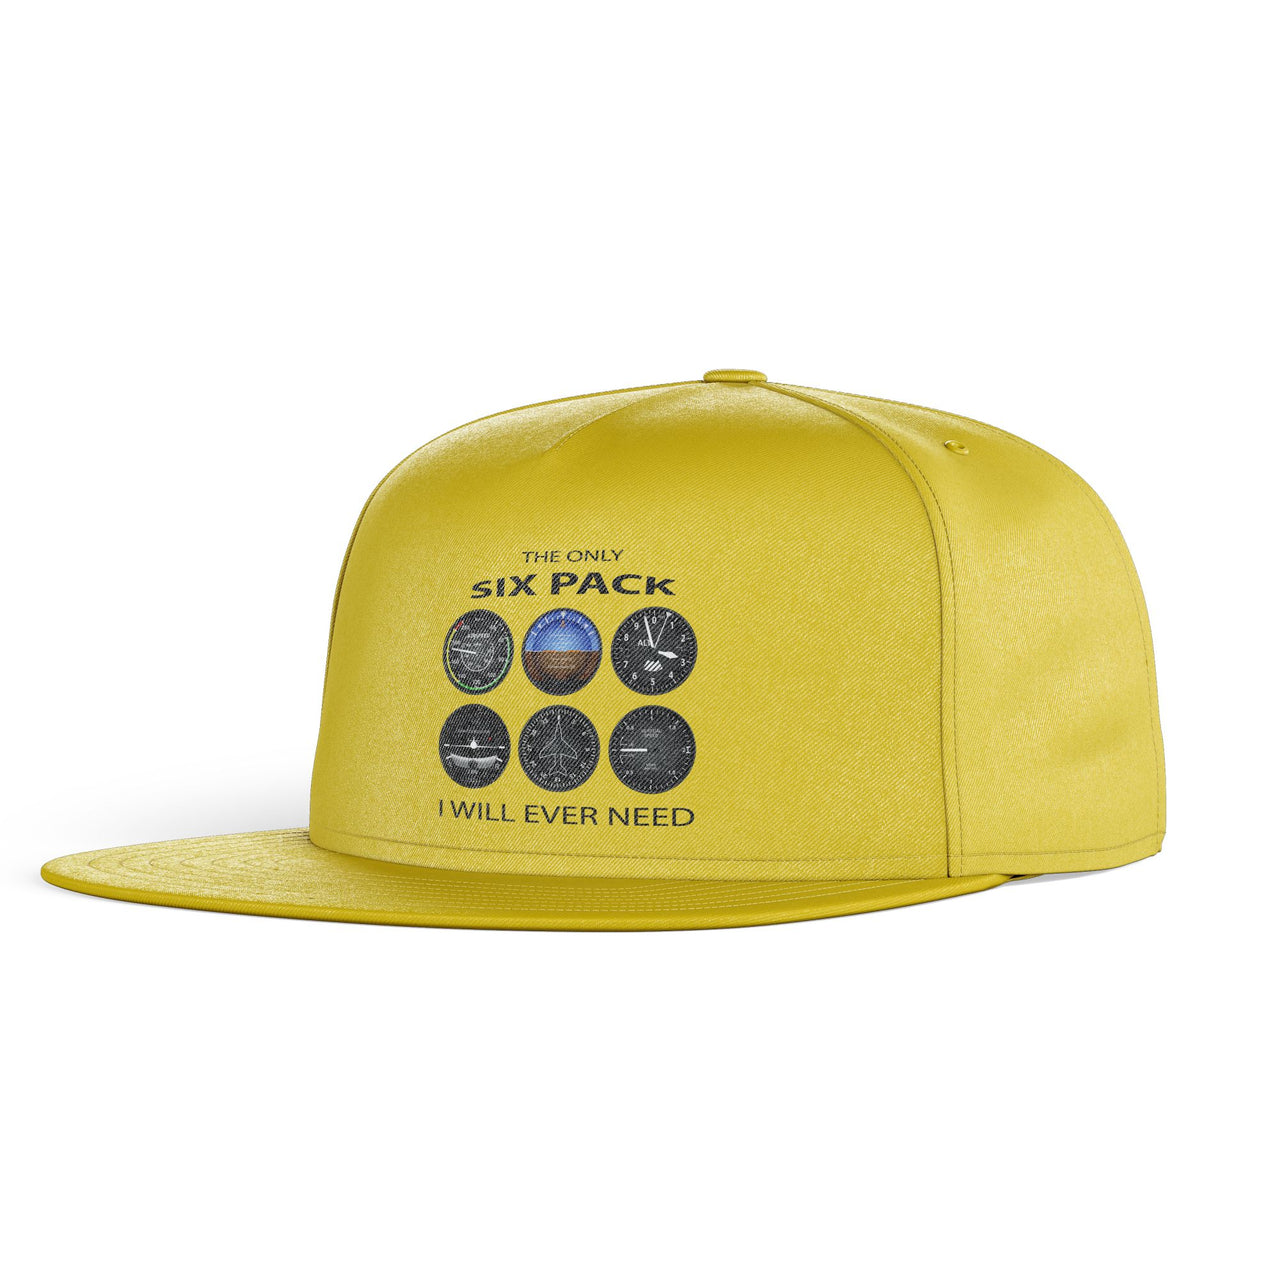 The Only Six Pack I Will Ever Need Designed Snapback Caps & Hats